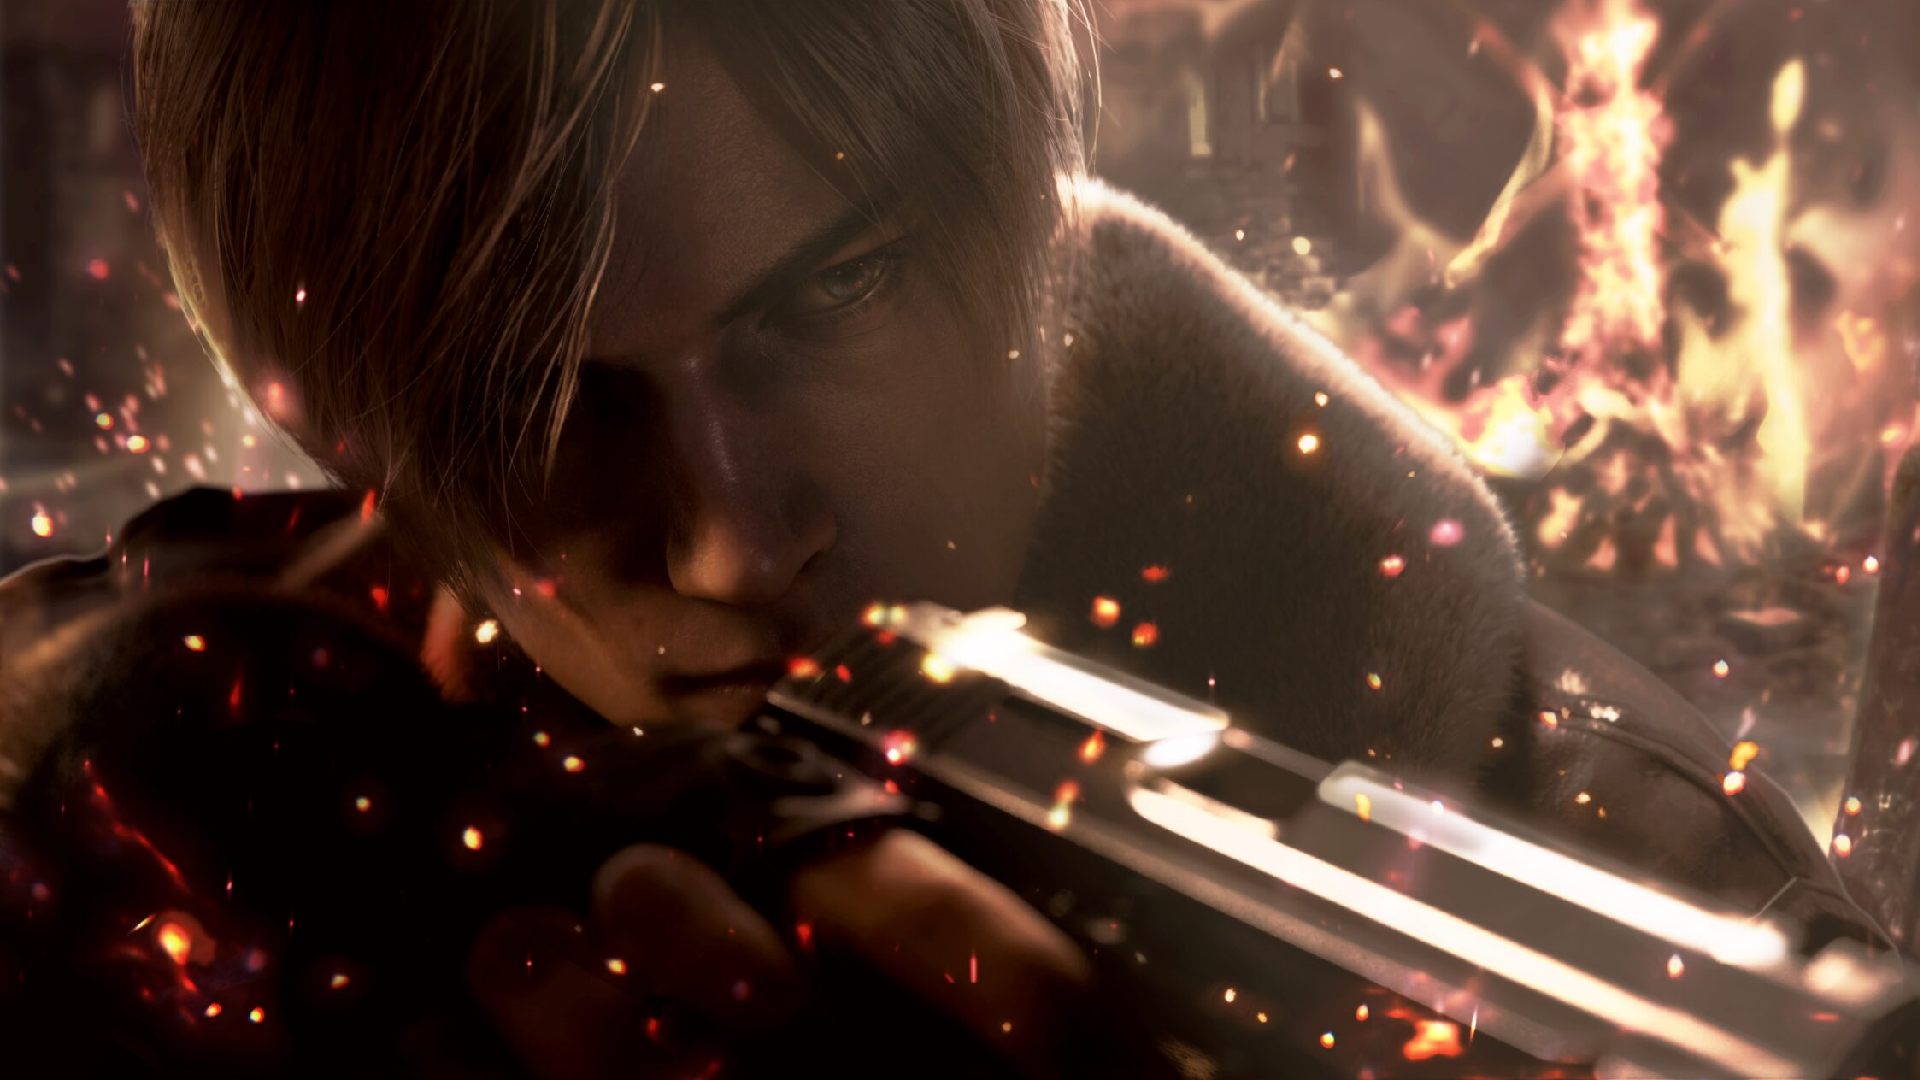 Resident Evil 4 Remake Review: Leon can be seen aiming a pistol